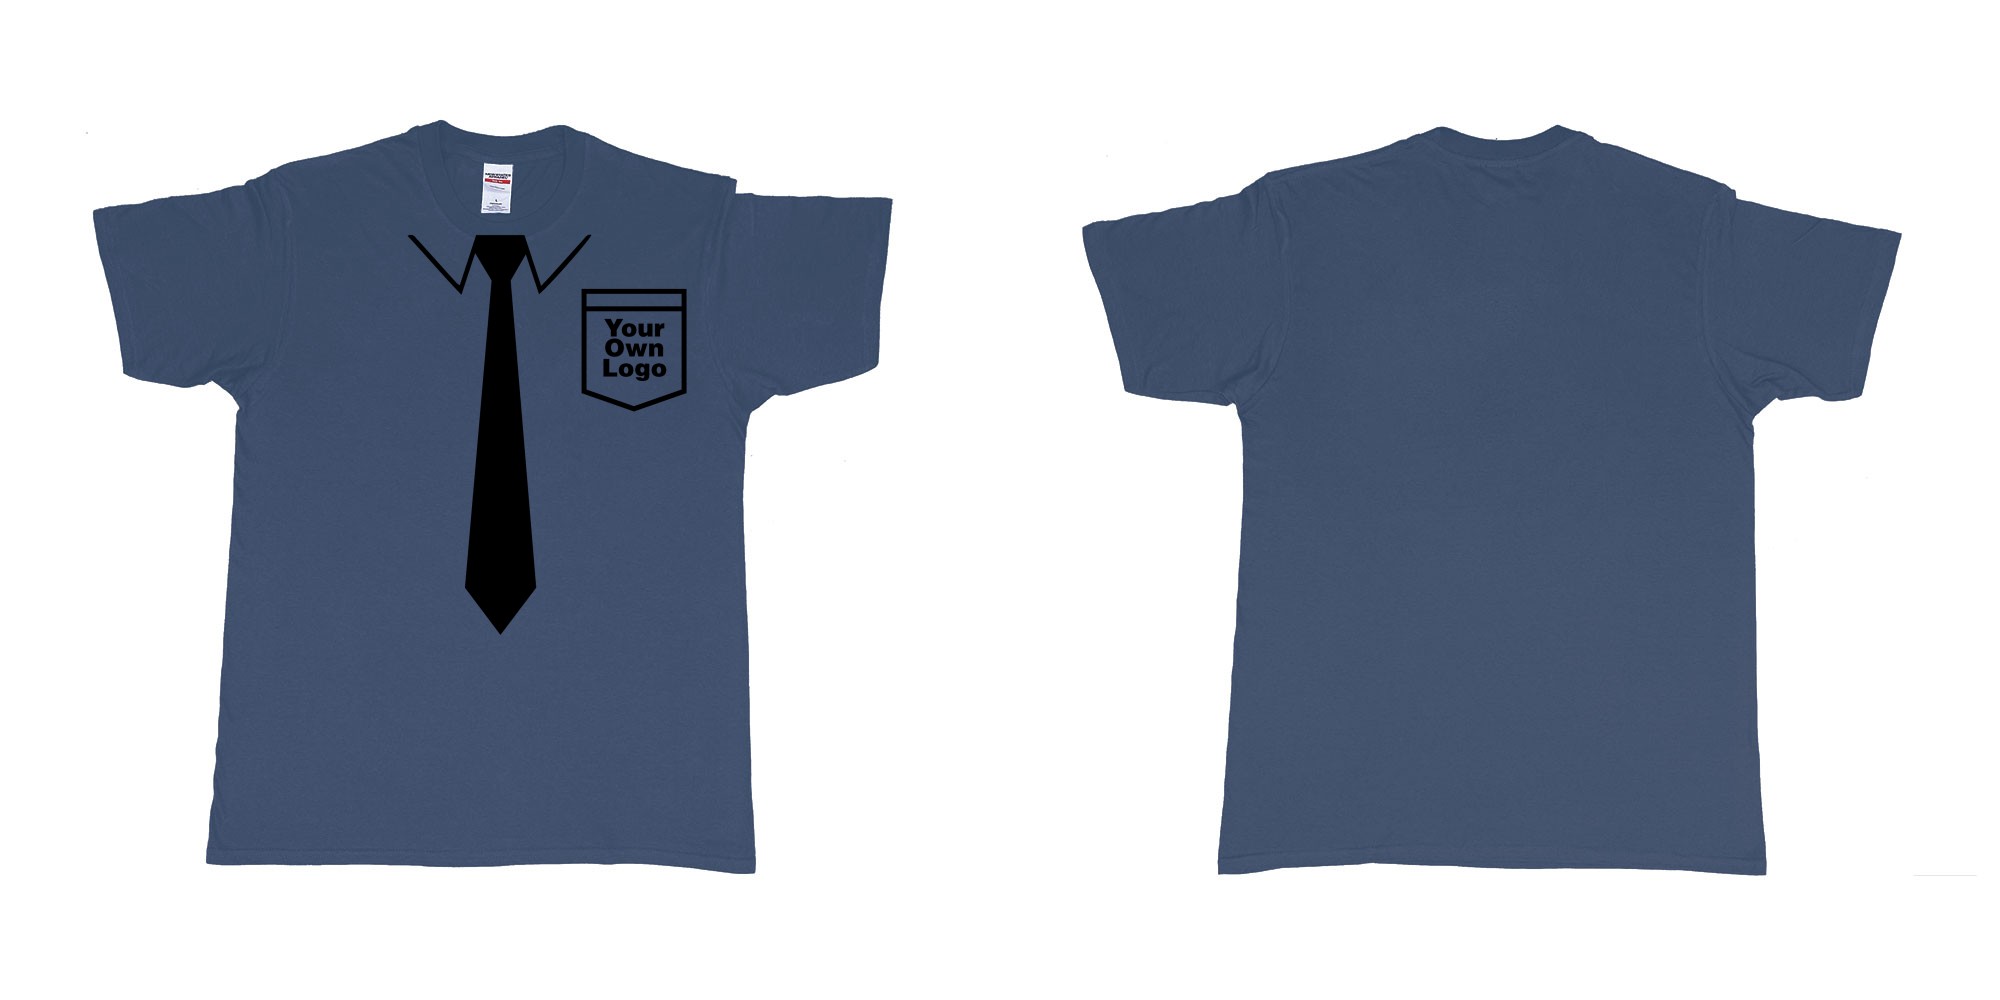 Custom tshirt design staff uniform with tie pocket own logo bali in fabric color navy choice your own text made in Bali by The Pirate Way